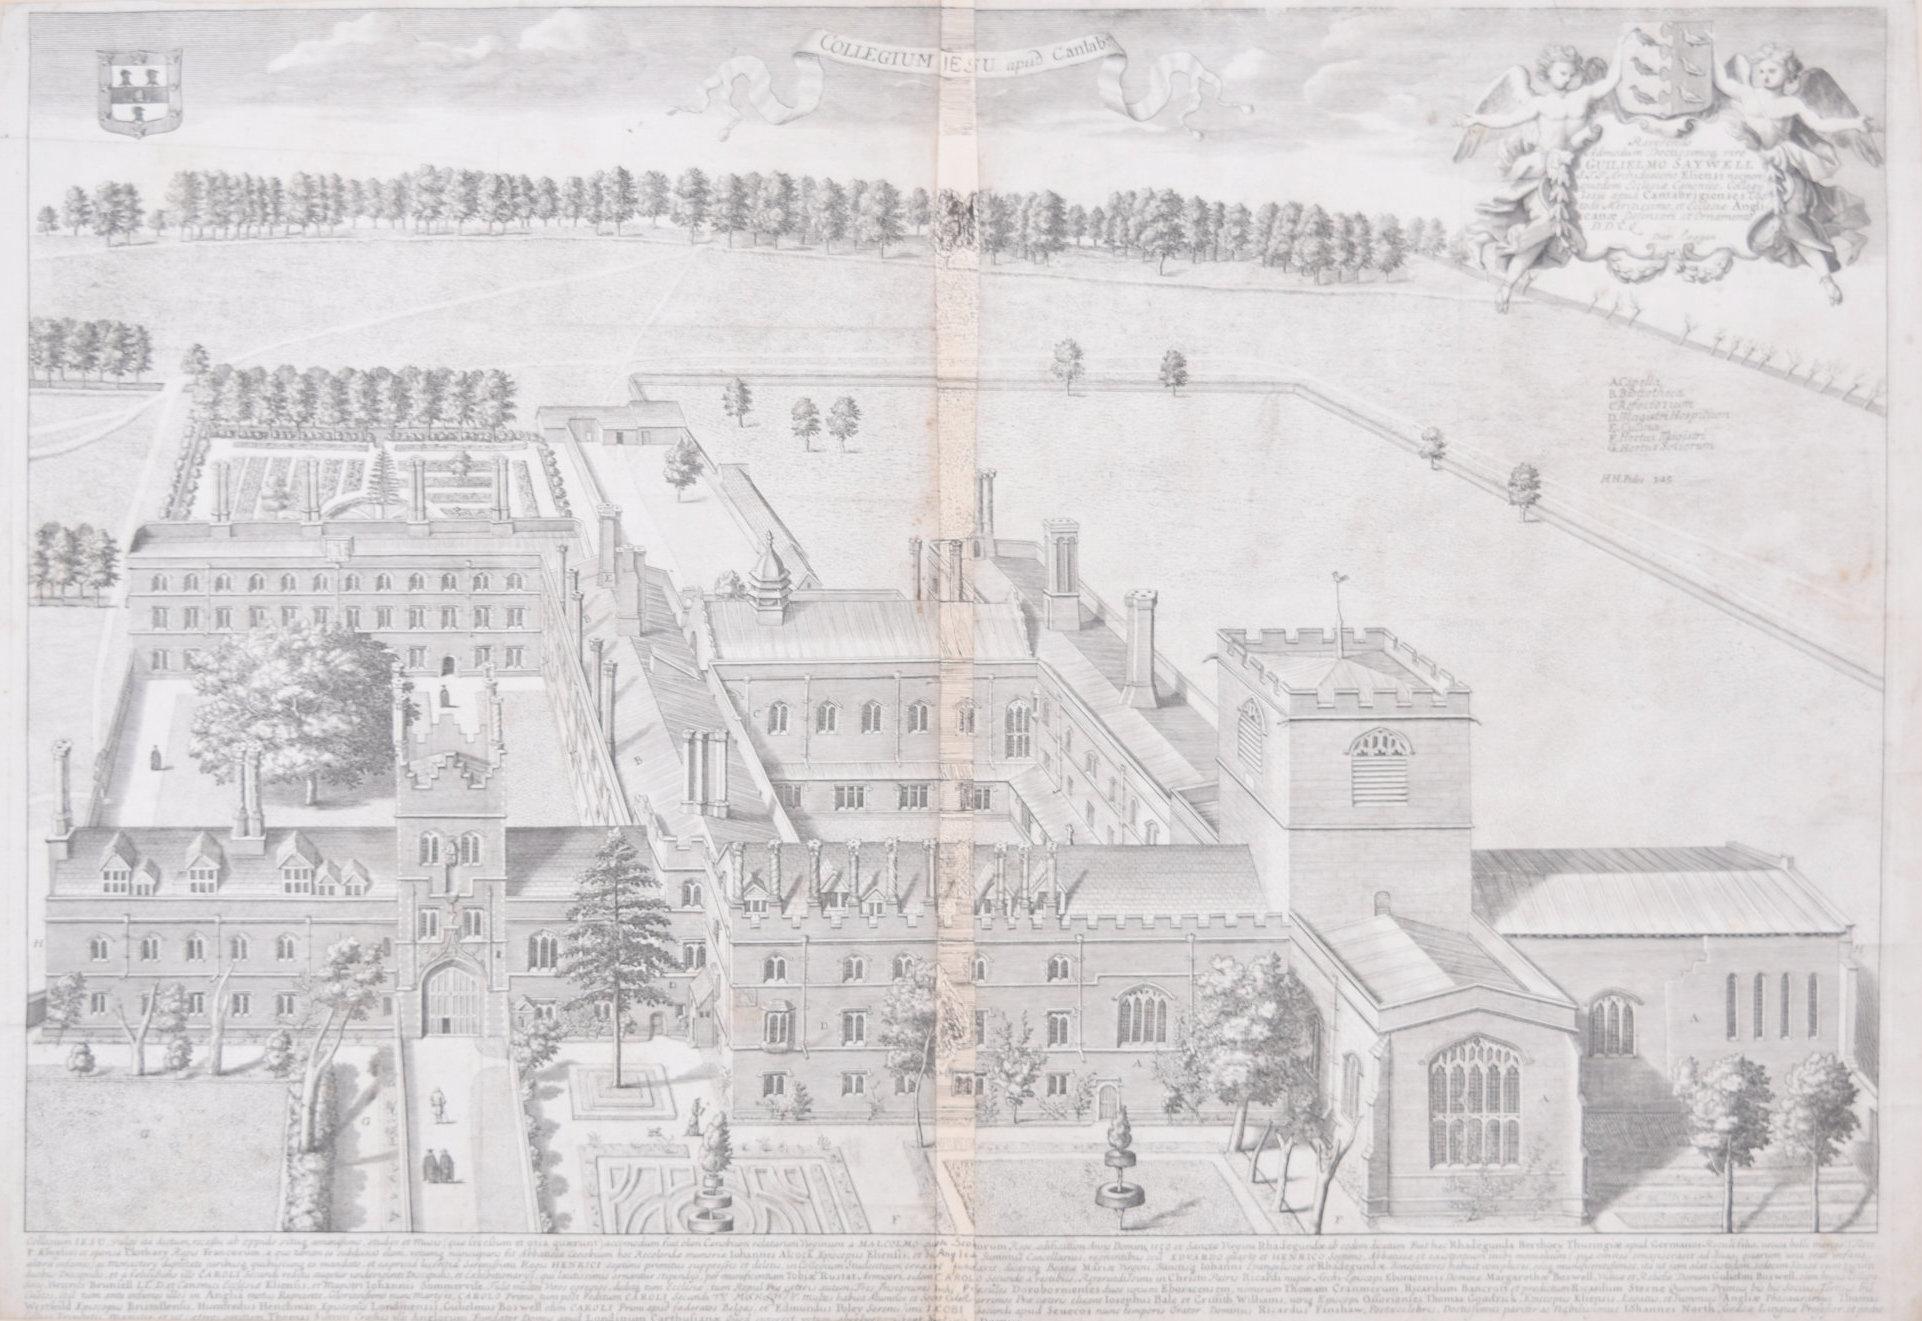 To see our other views of Oxford and Cambridge, scroll down to "More from this Seller" and below it click on "See all from this seller" - or send us a message if you cannot find the view you want.

David Loggan (1634 - 1692)
Jesus College, Cambridge